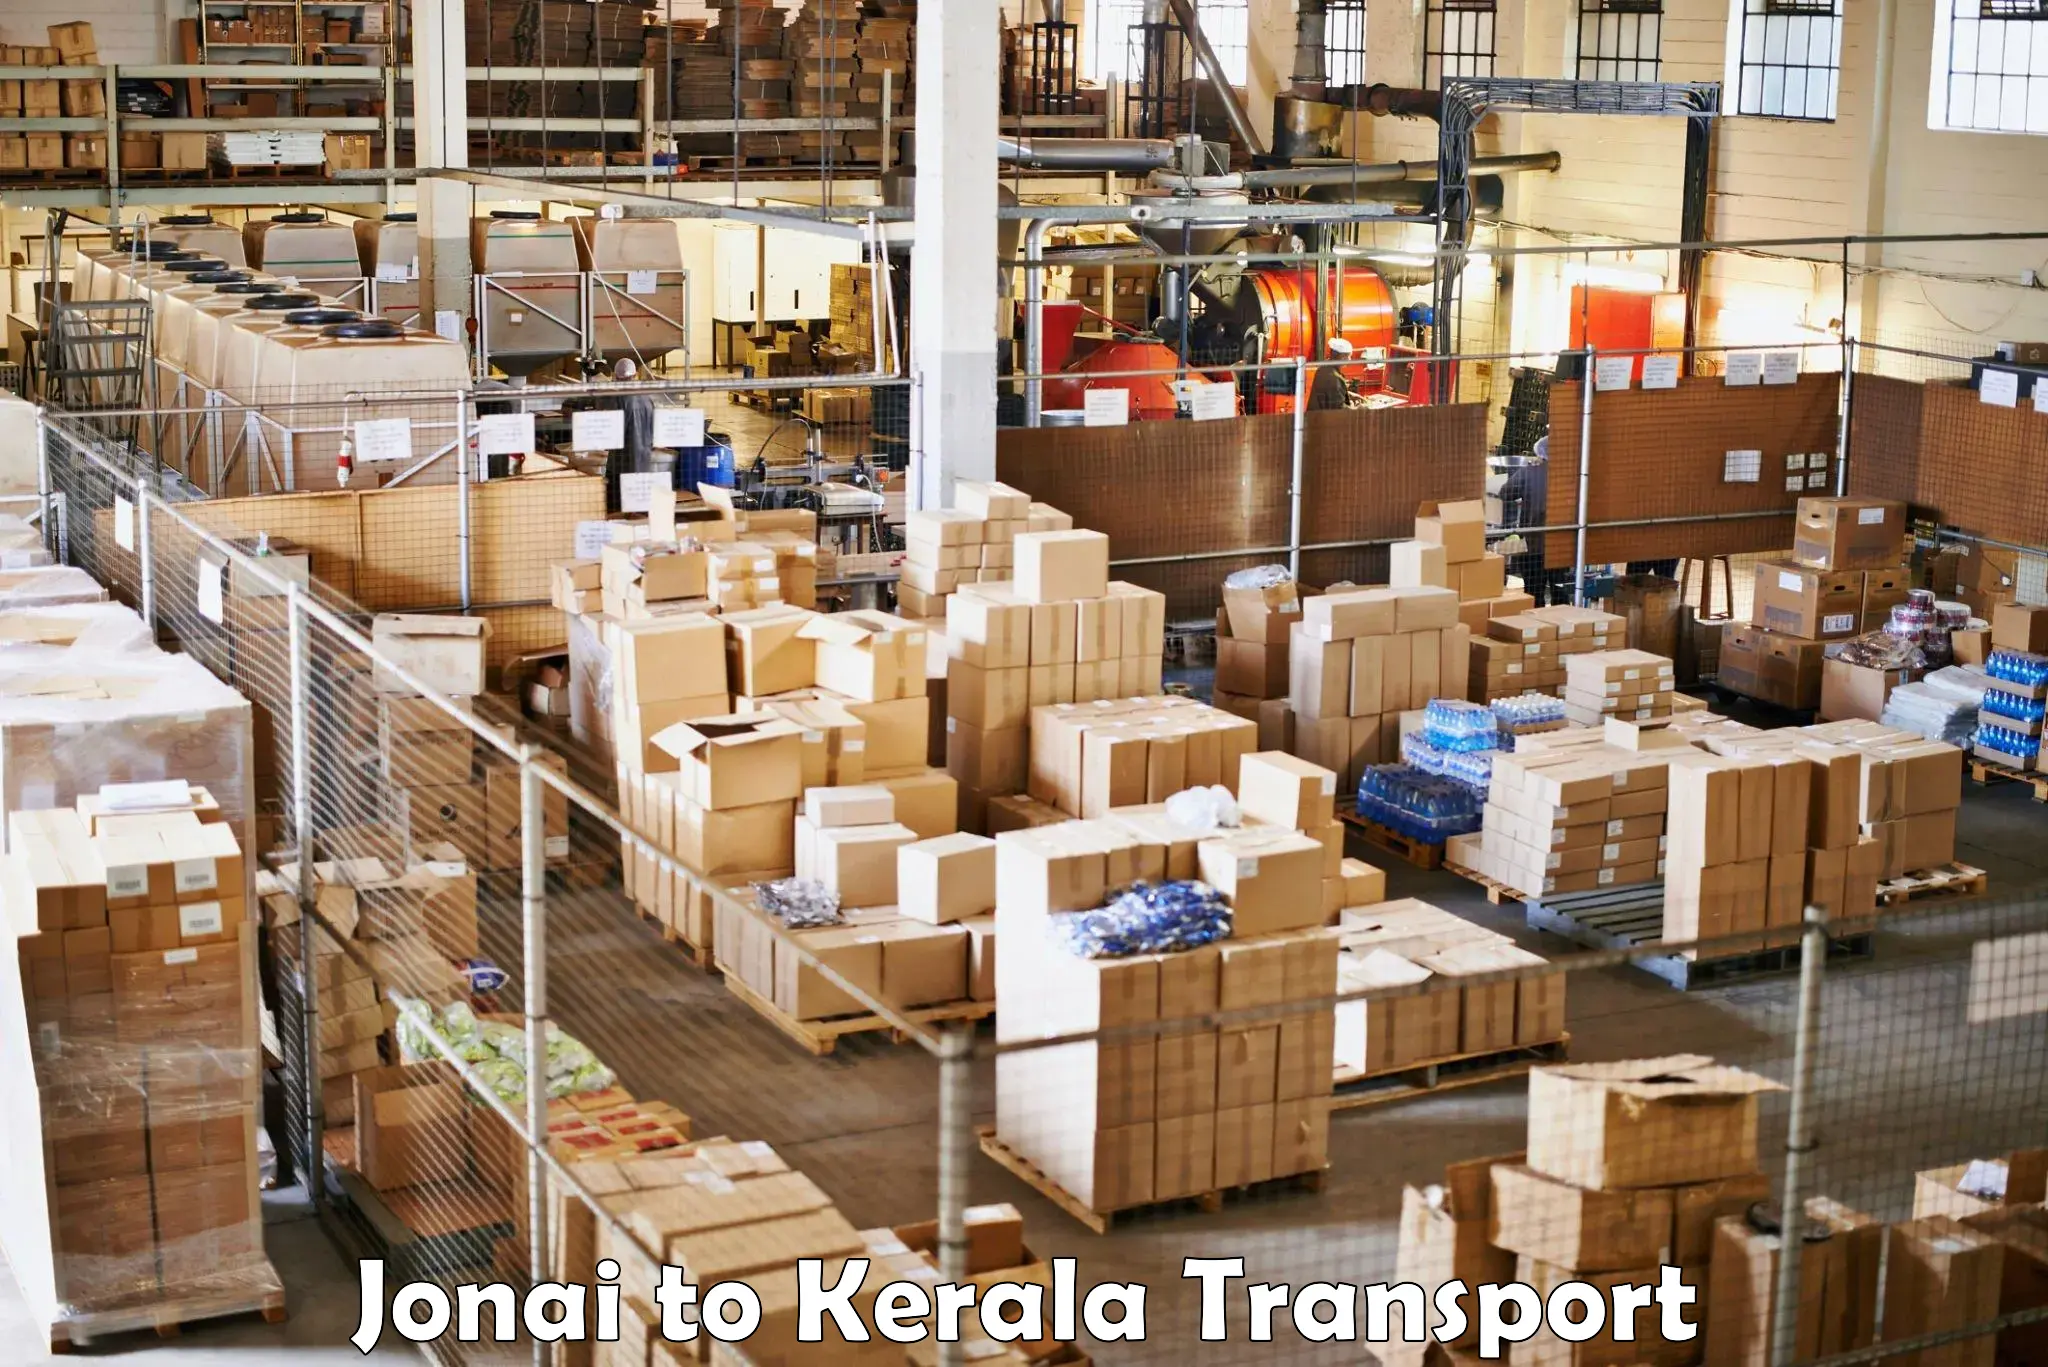 Parcel transport services Jonai to Cochin University of Science and Technology